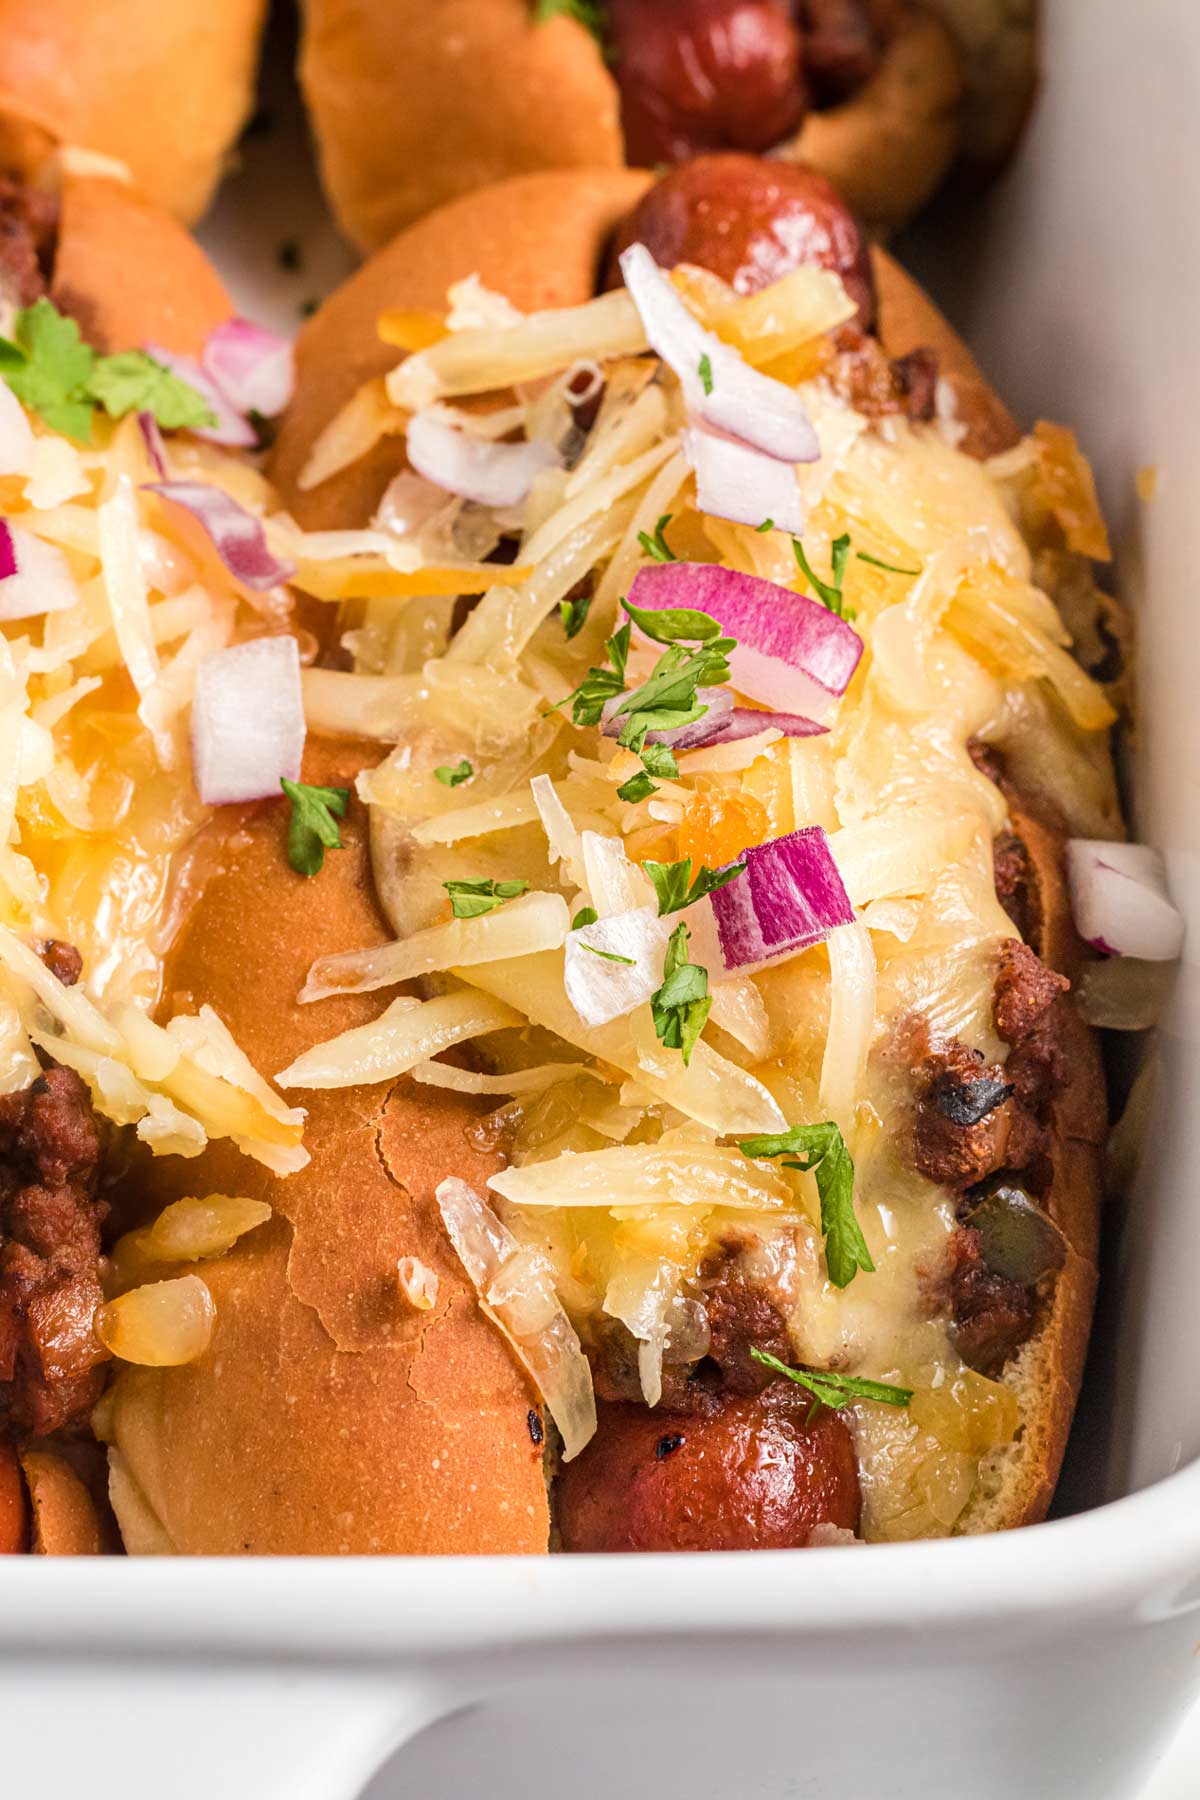 a chili dog in a pan.